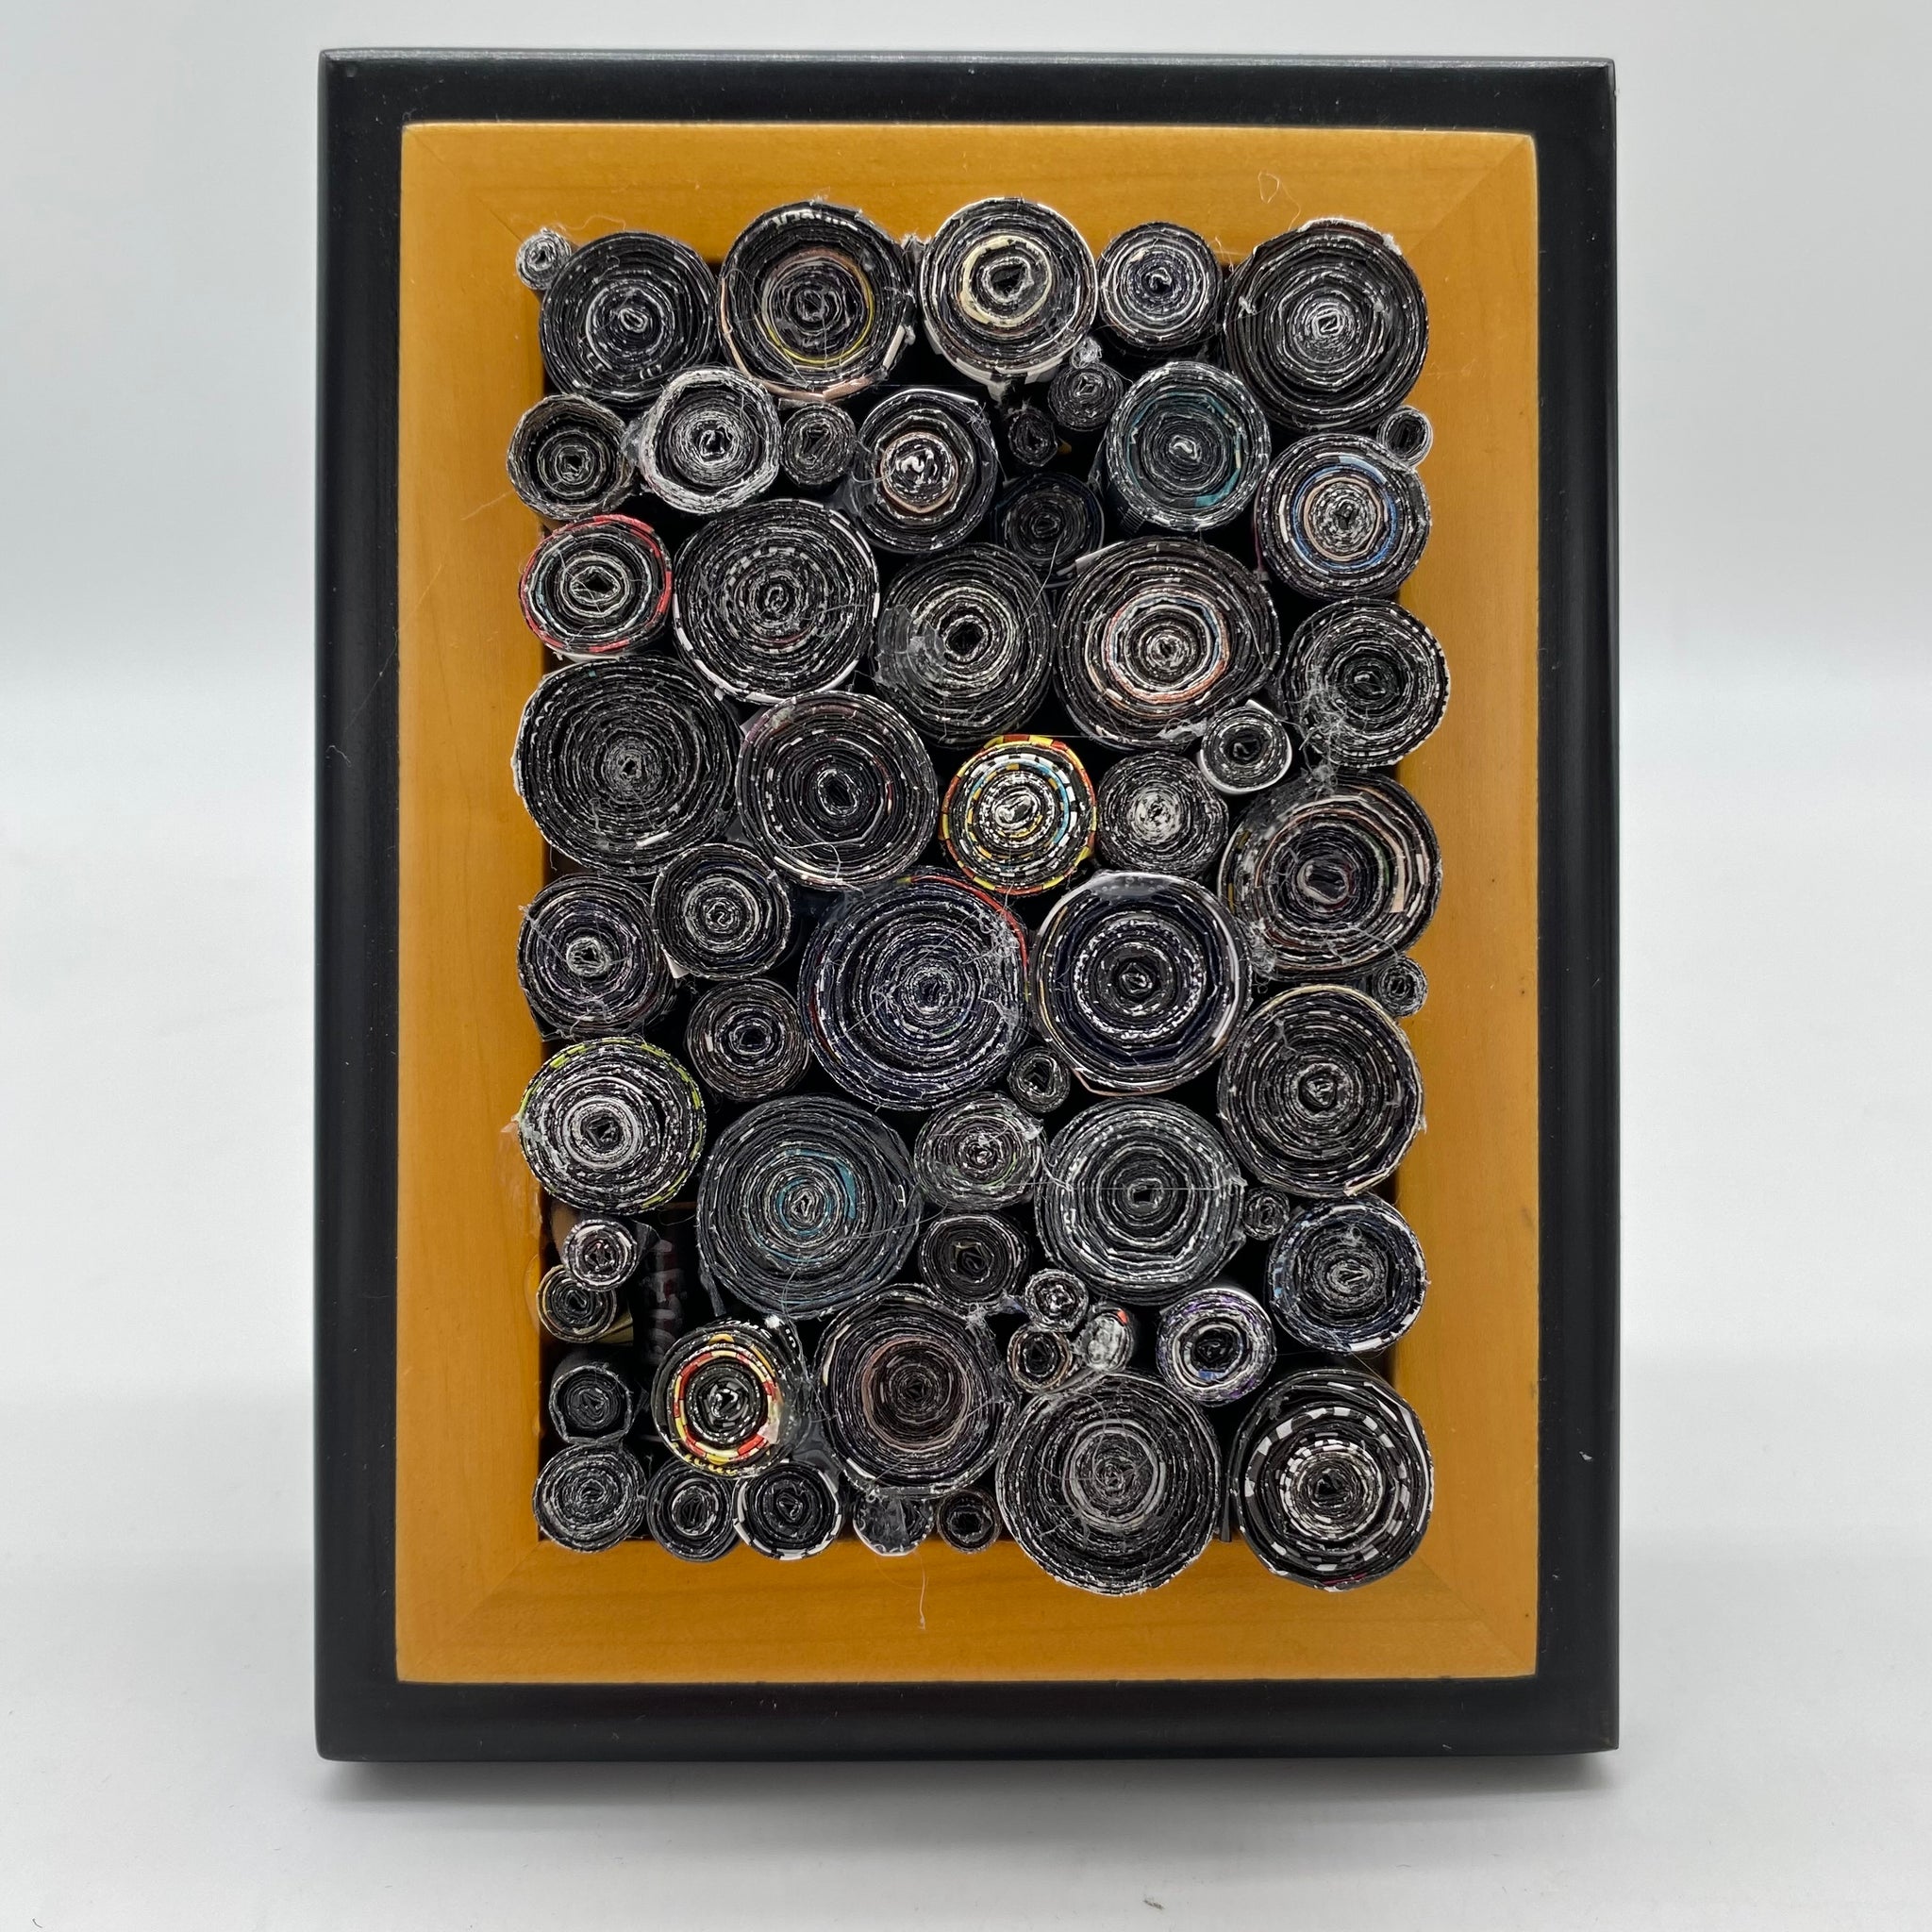 Rolled black rolled magazines created by Trash Art Treasures